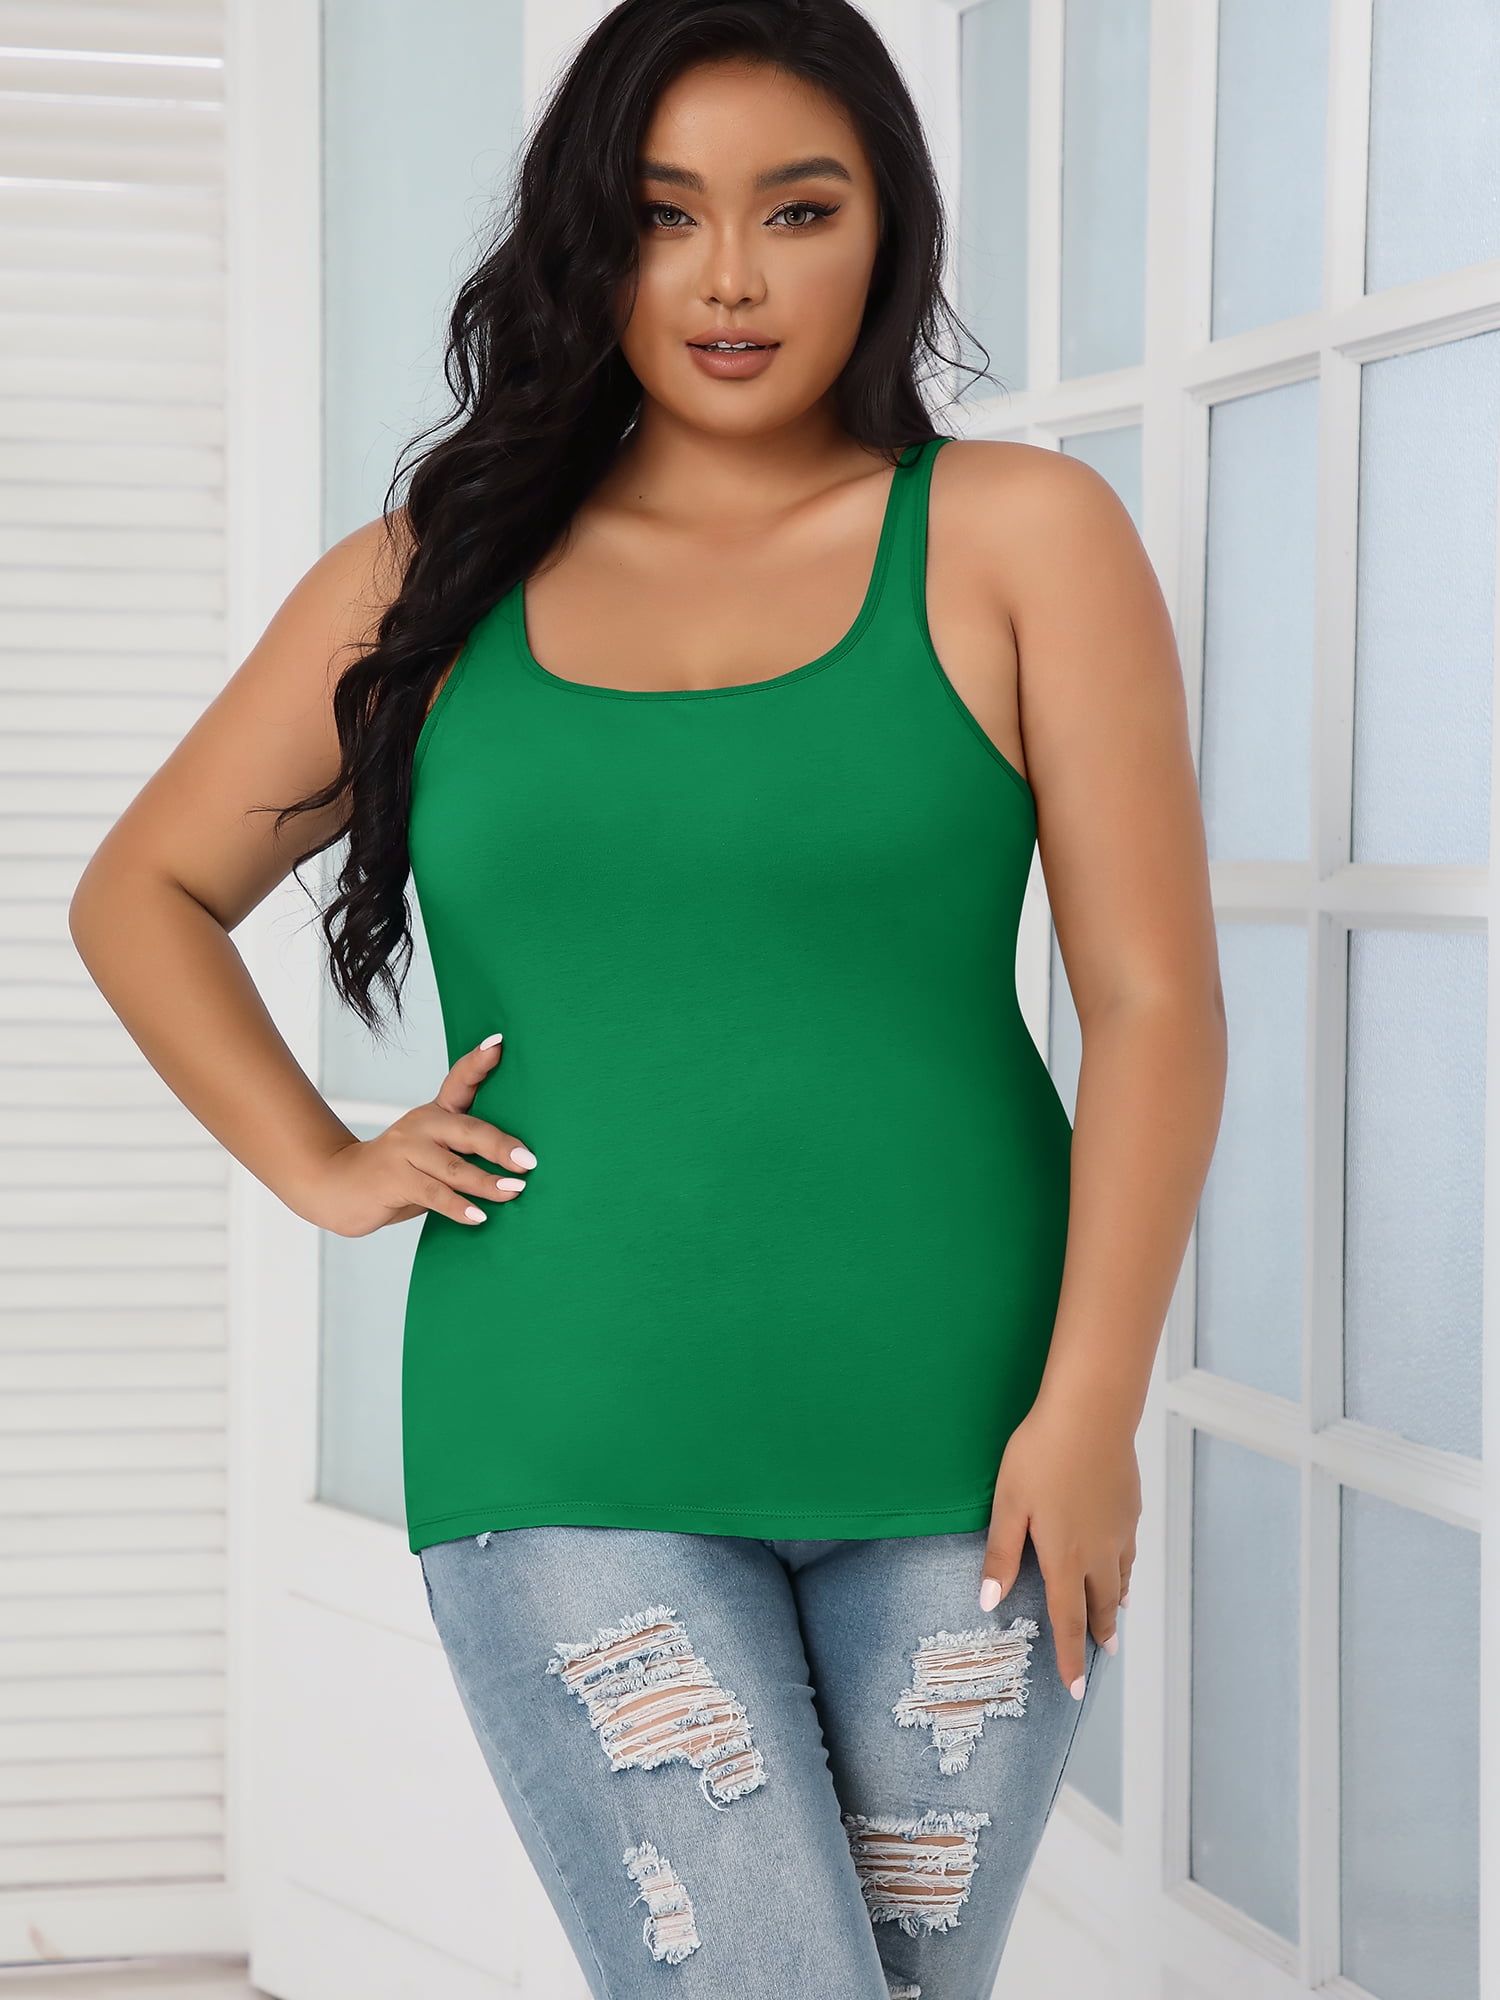 Beautyin Plus Size Tank Top for Women Adjustable Spaghetti Wide Straps  Sleeveless T-shirts Cami 